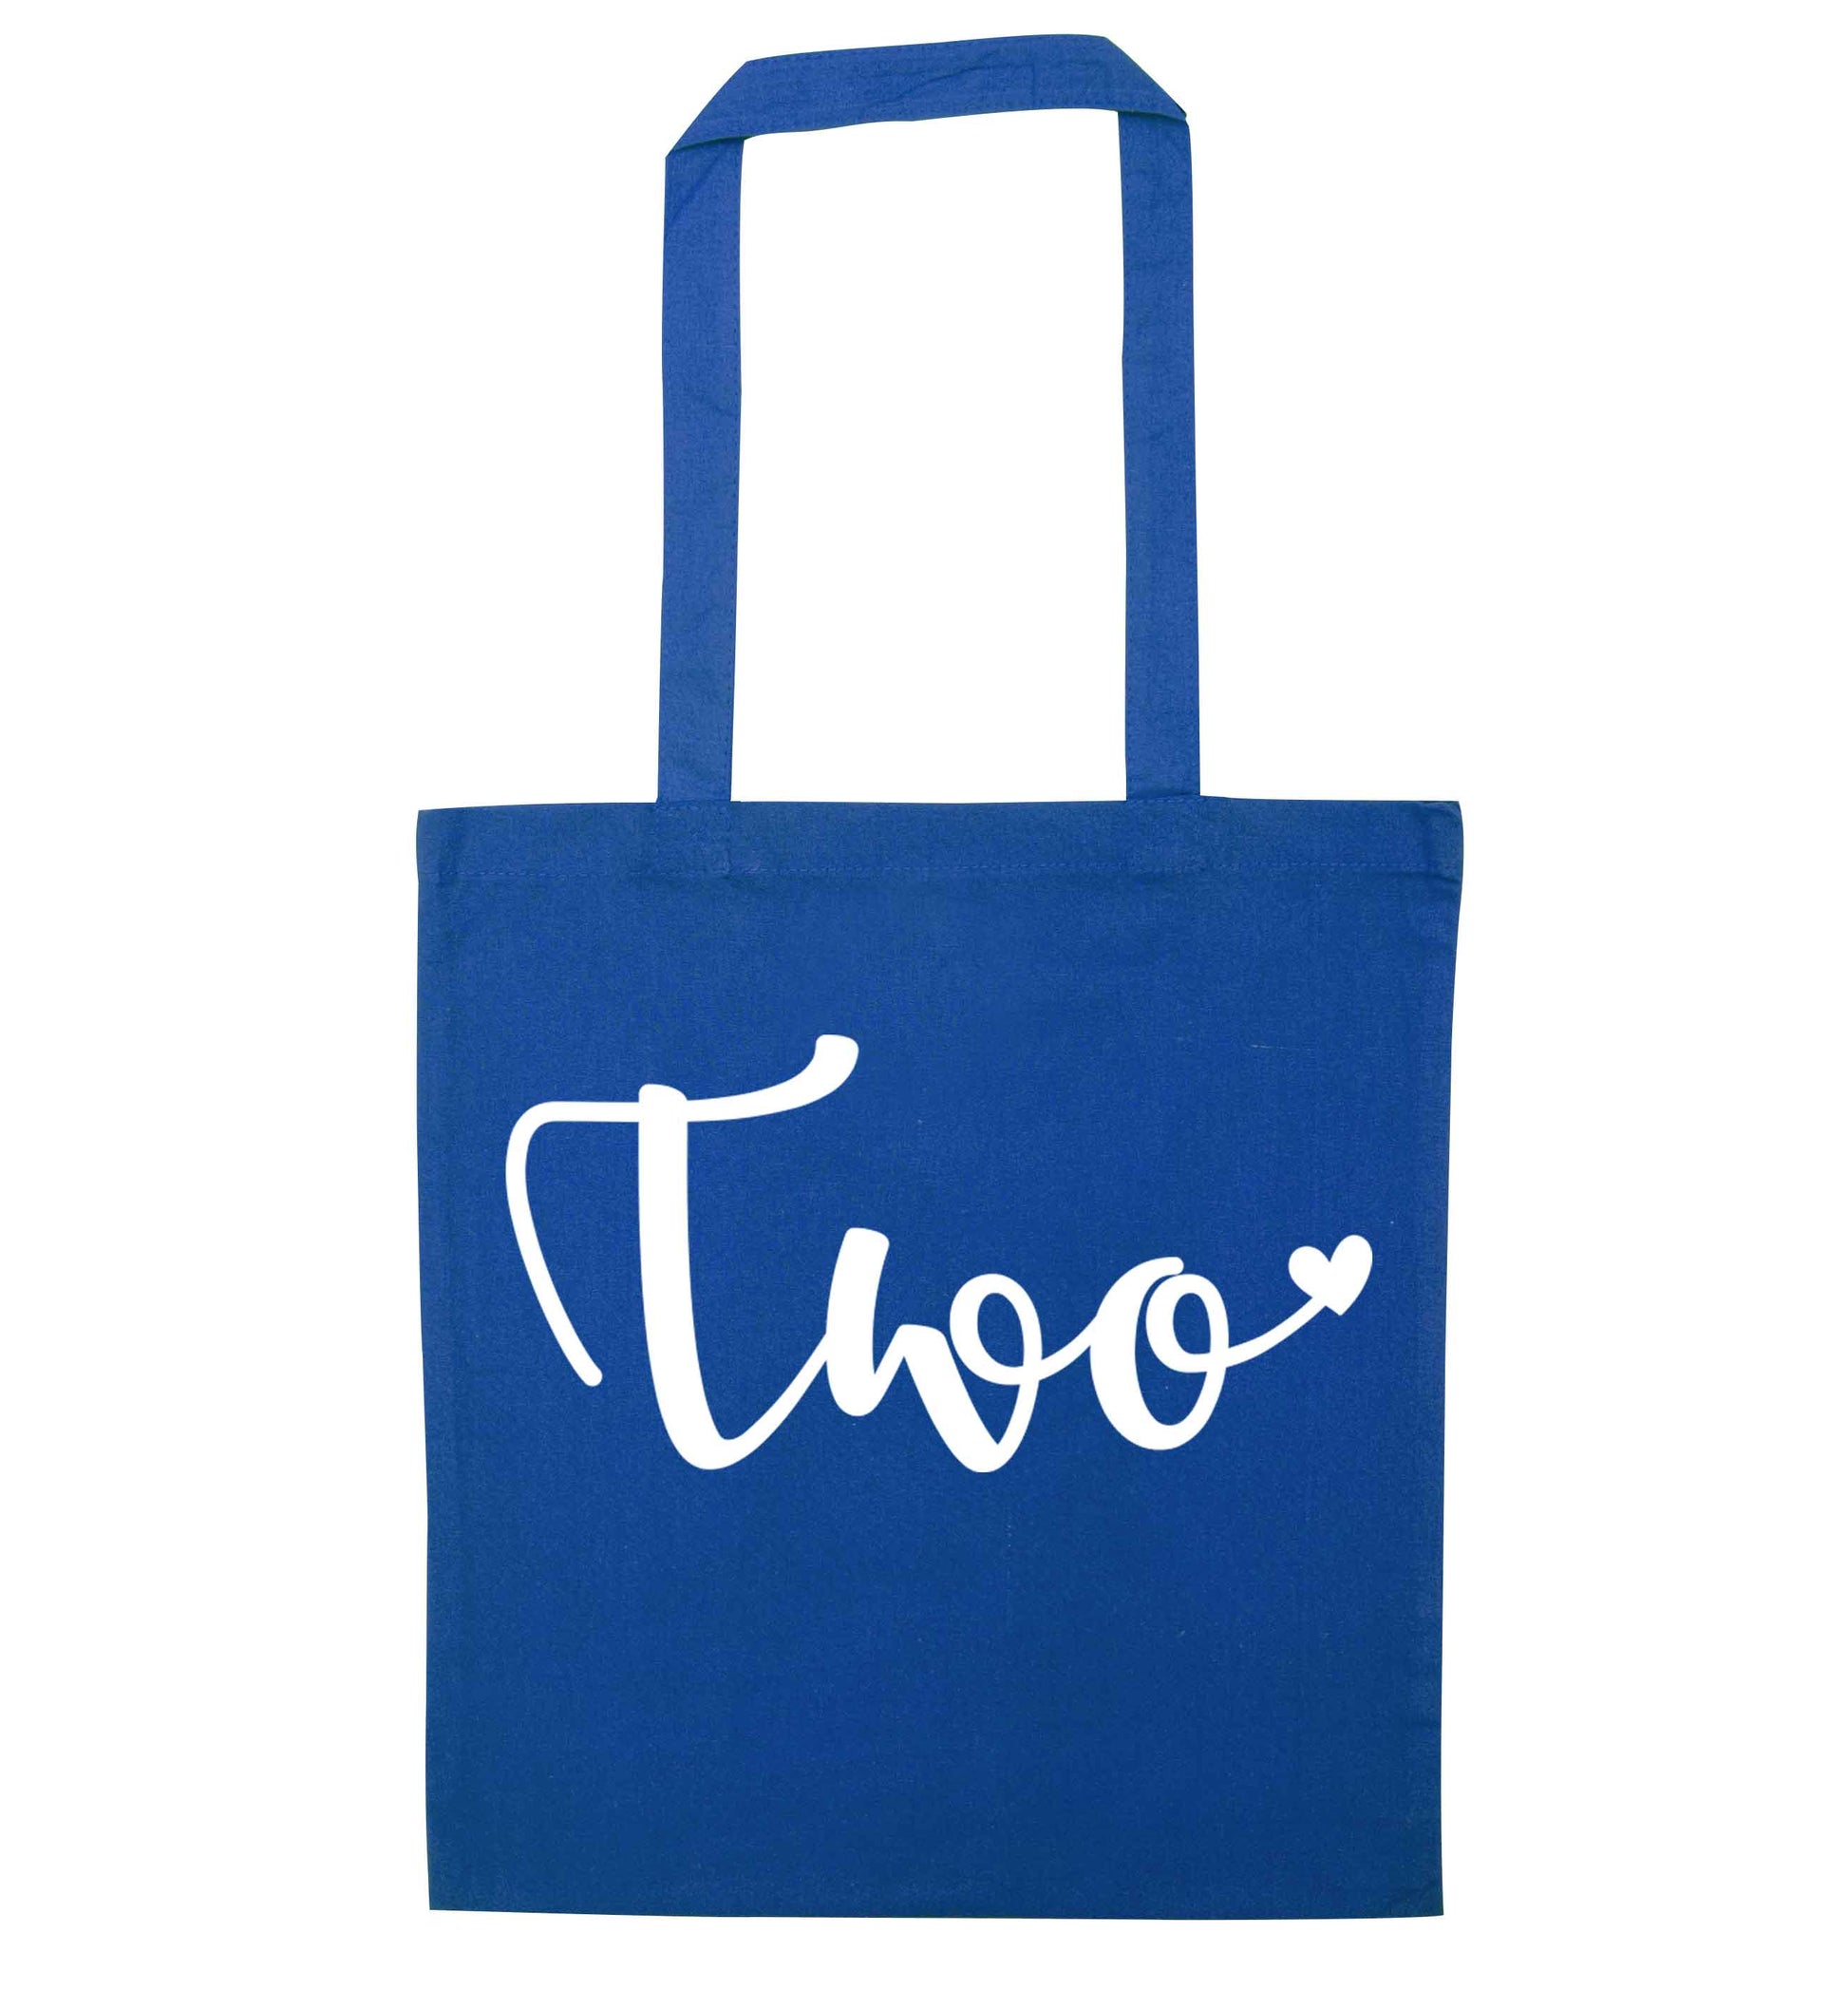 Two and Heart blue tote bag